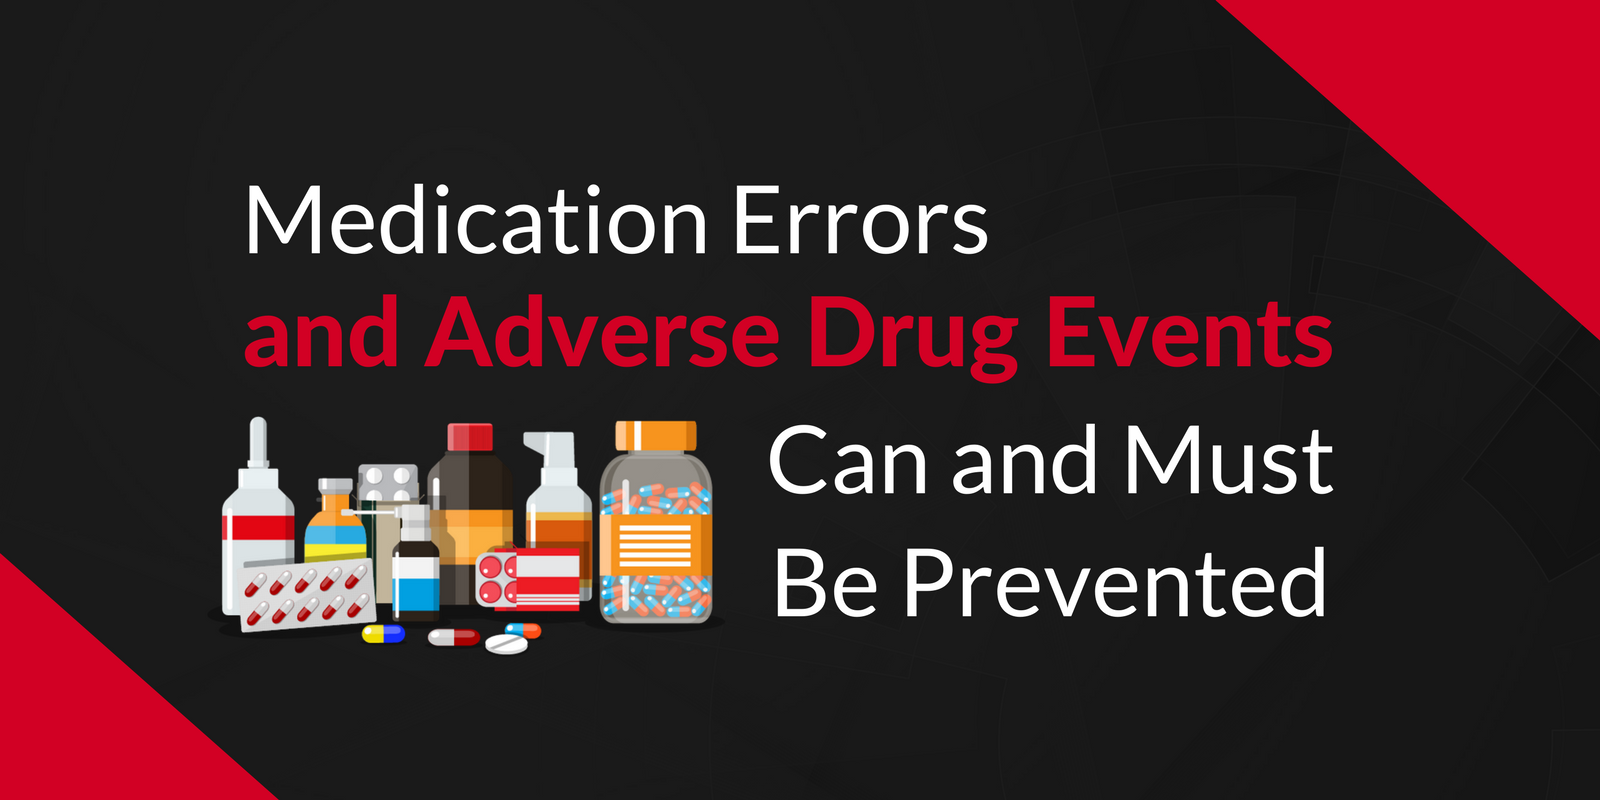 Medication Errors and Adverse Drug Events Can and Must Be Prevented